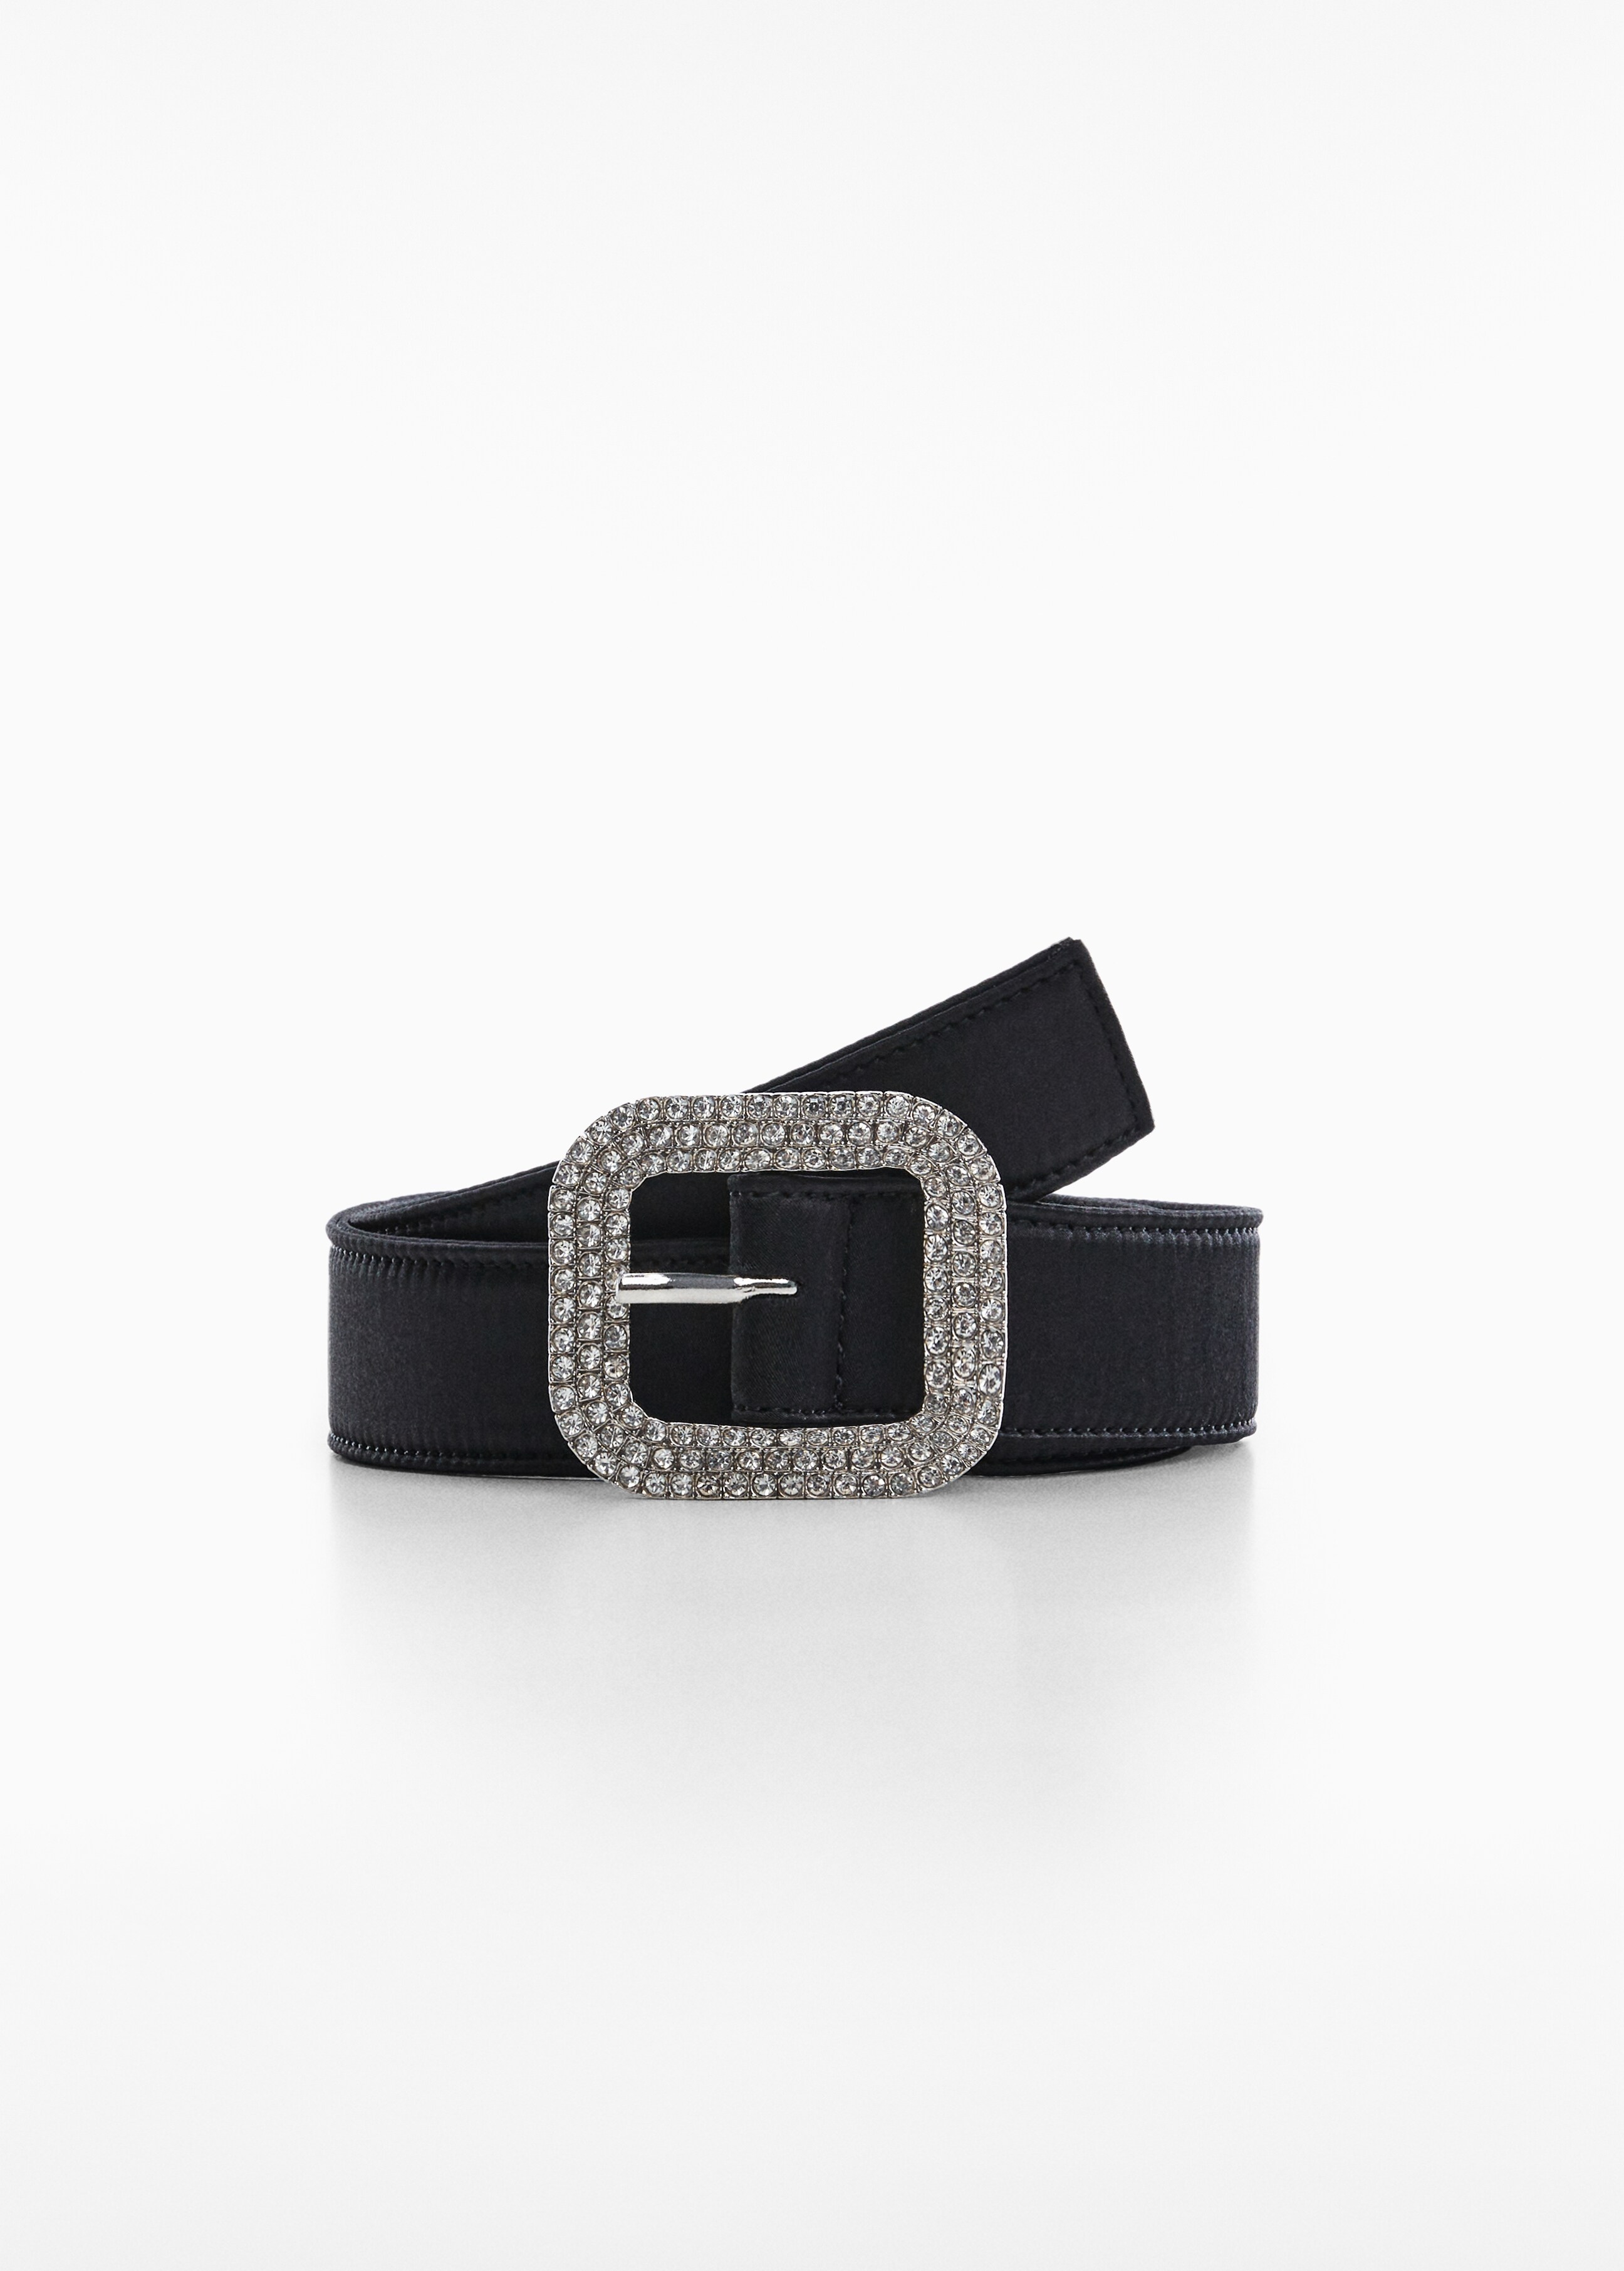 Faceted crystal buckle belt - Article without model